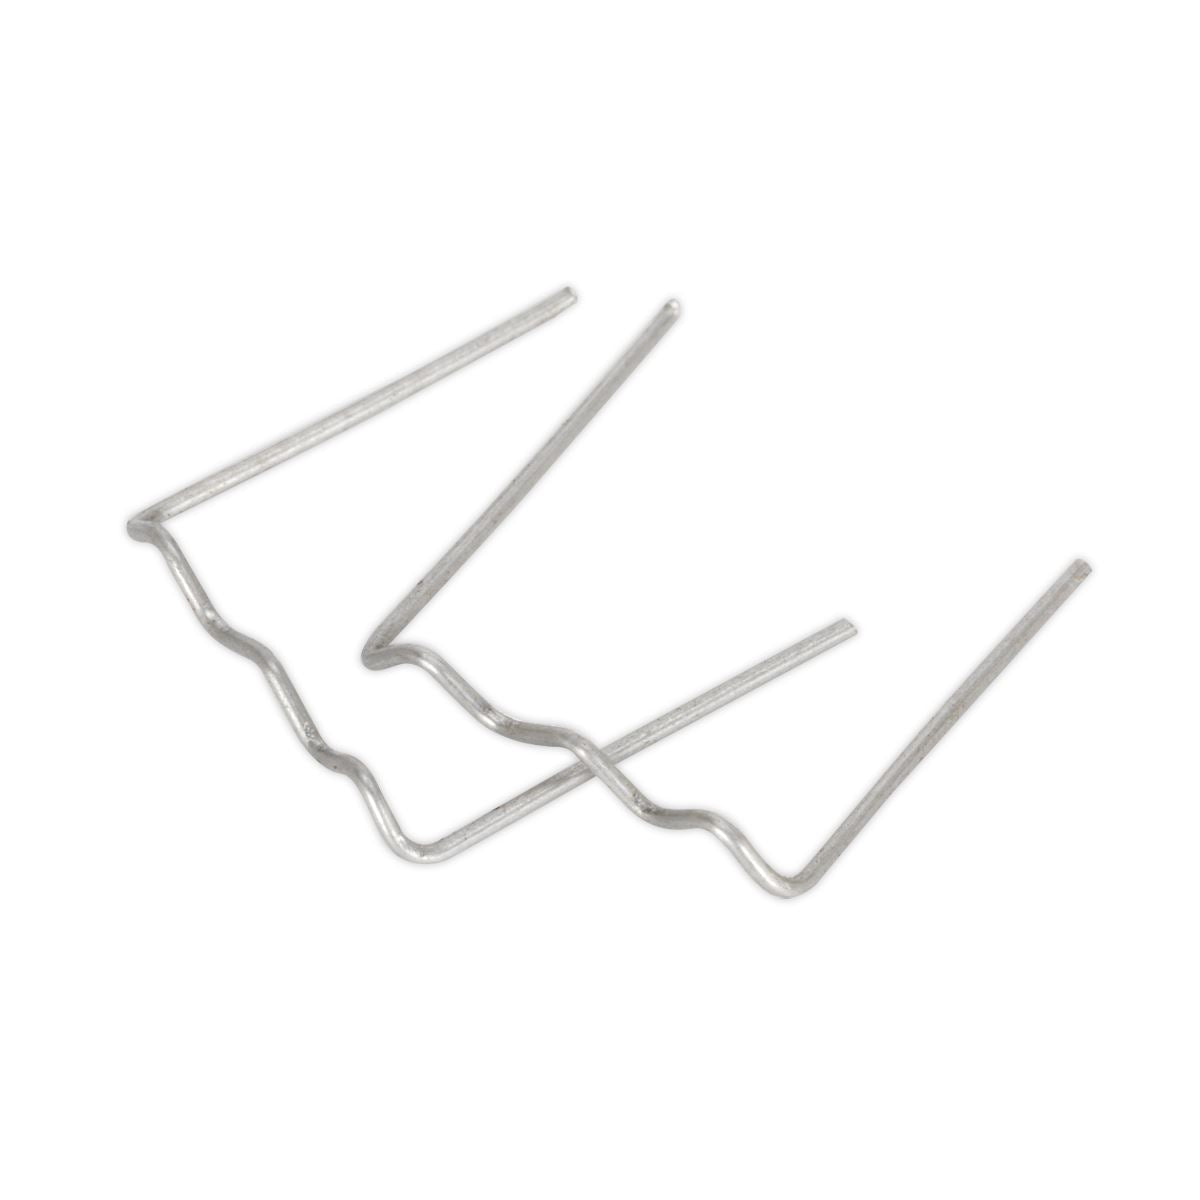 Sealey Flat Staple 0.6mm Pack of 100